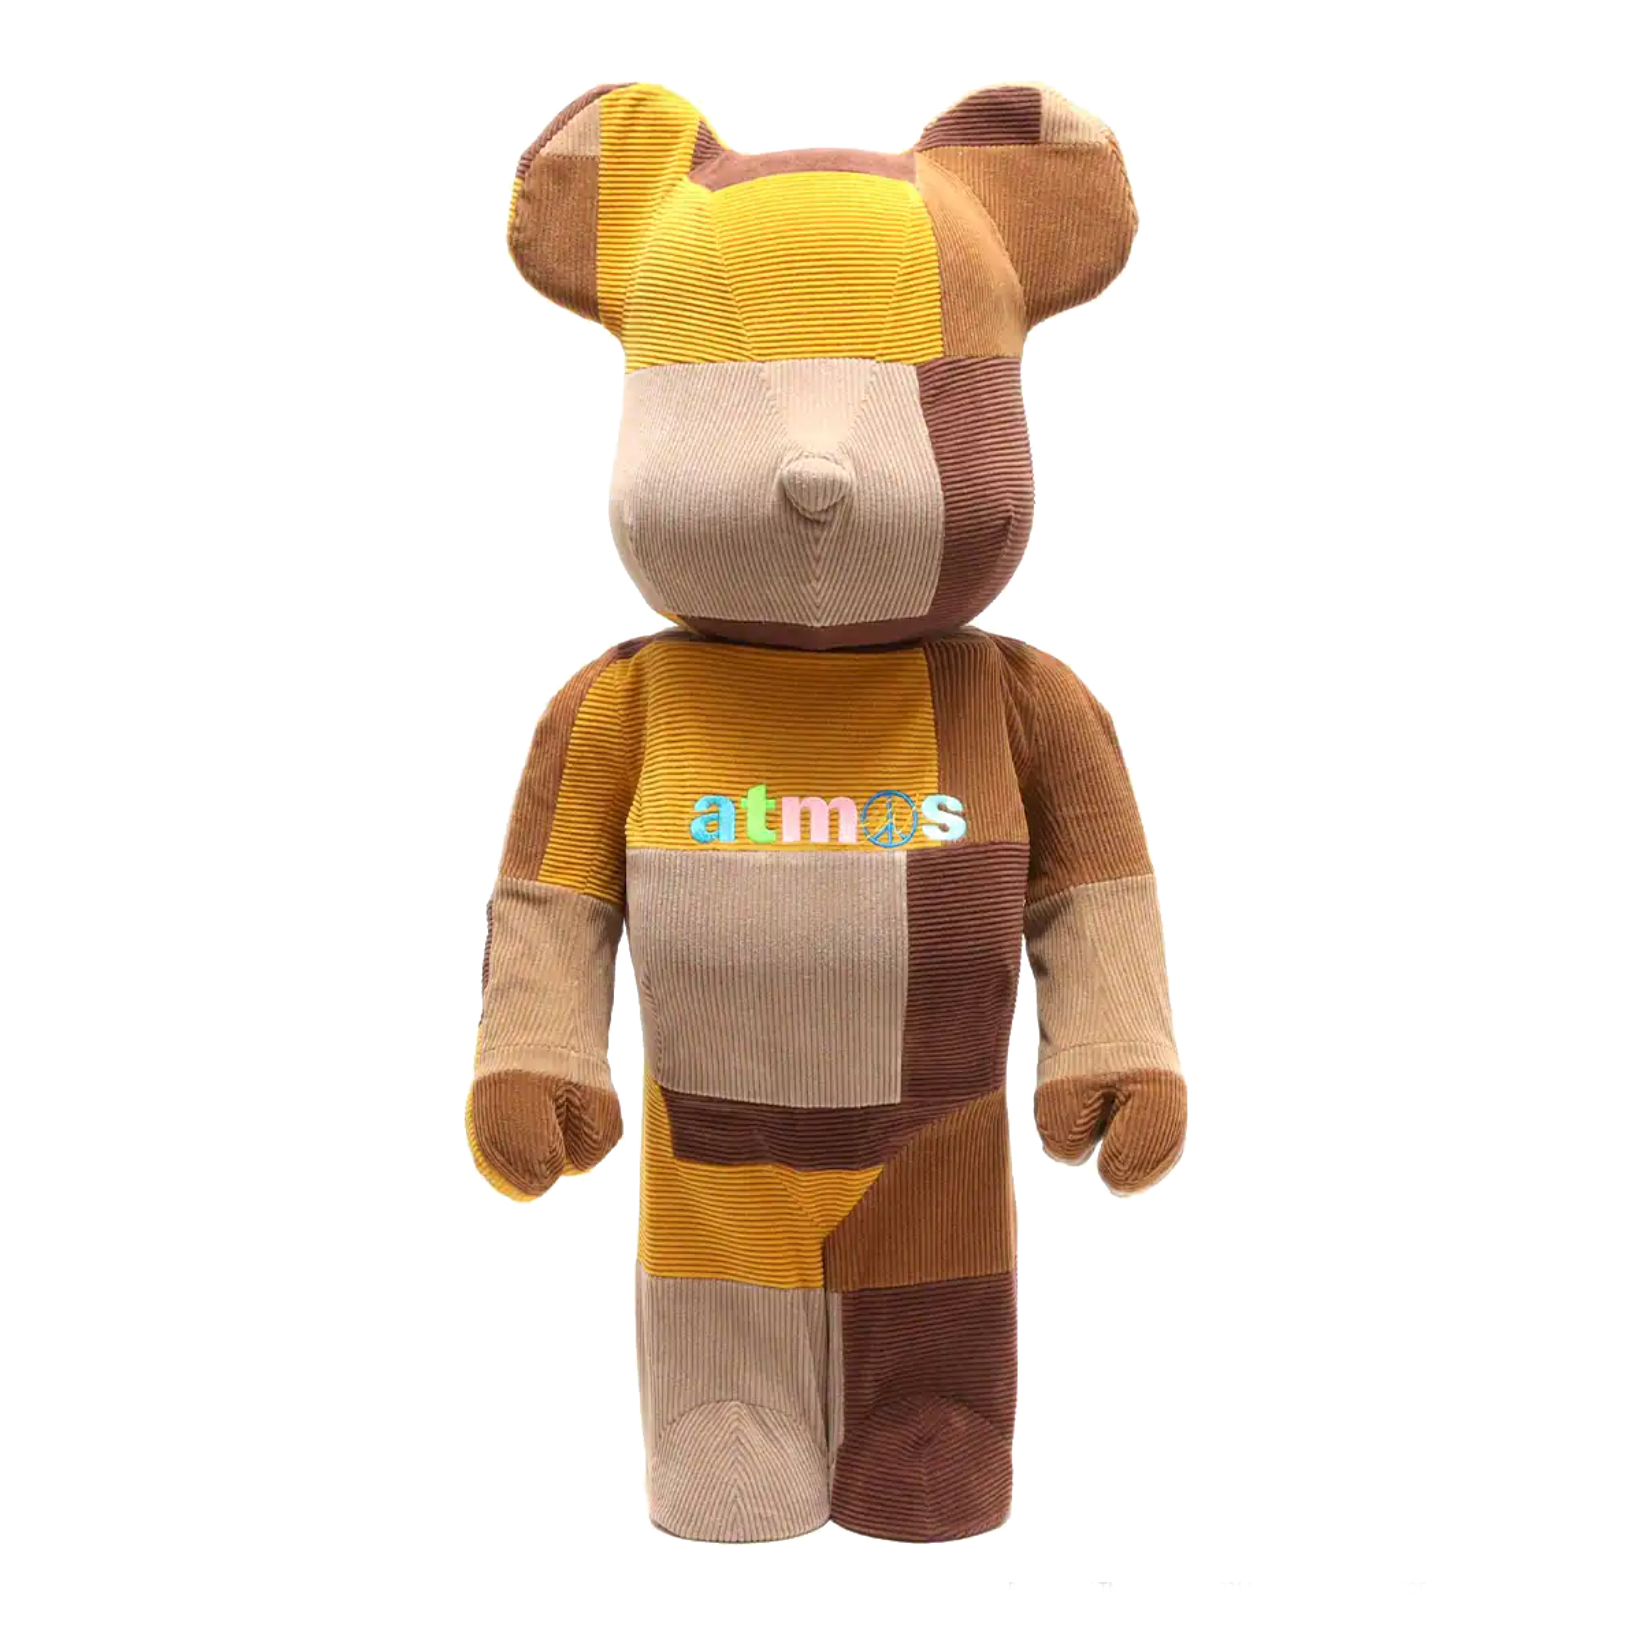 Bearbrick x atmos x Sean Wotherspoon 1000% 'Brown' - 597386 - Novelship